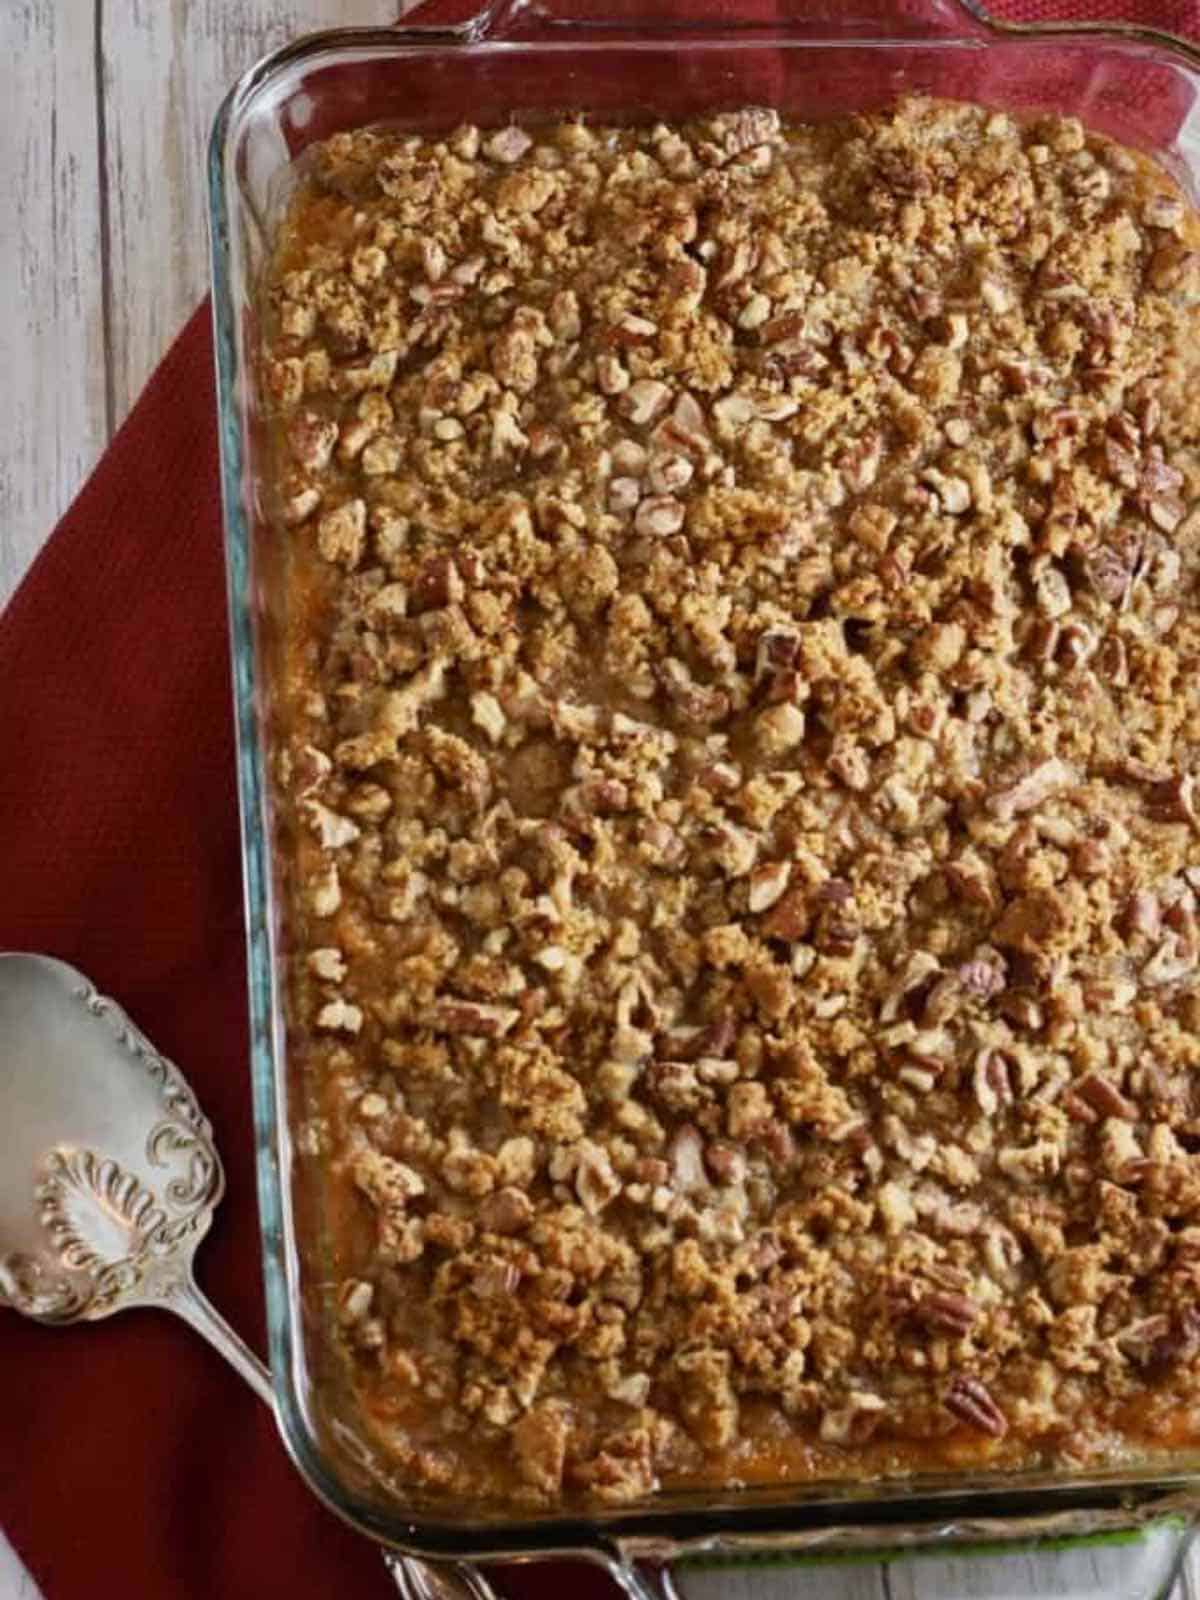 A sweet potato casserole topped with pecans in a rectangular glass baking dish.